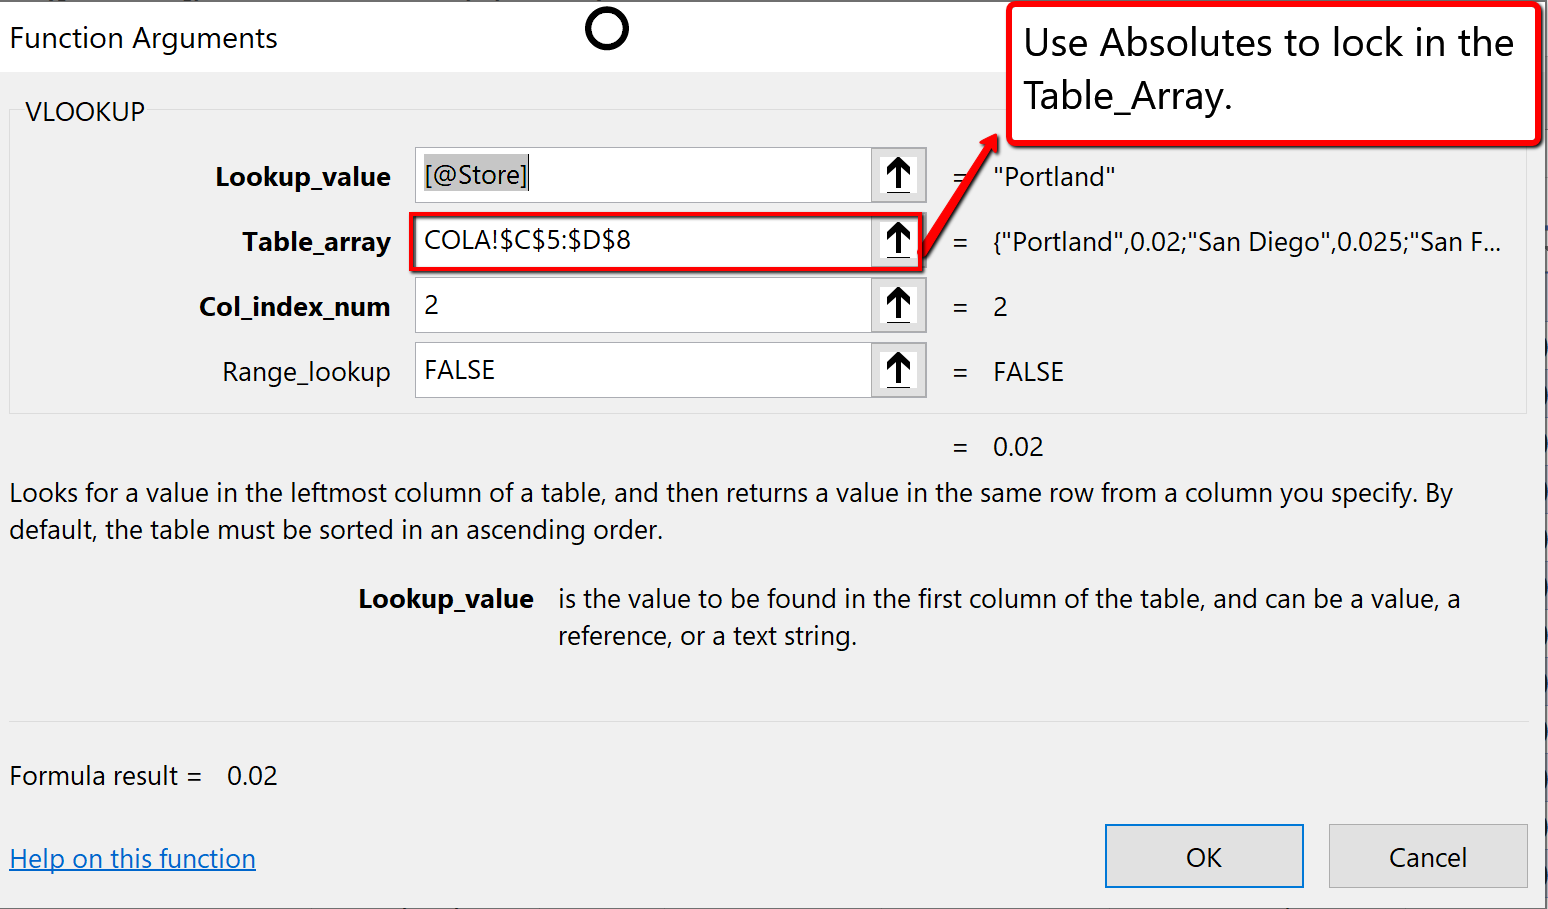 Screenshot of the VLOOKUP function argument dialogue box